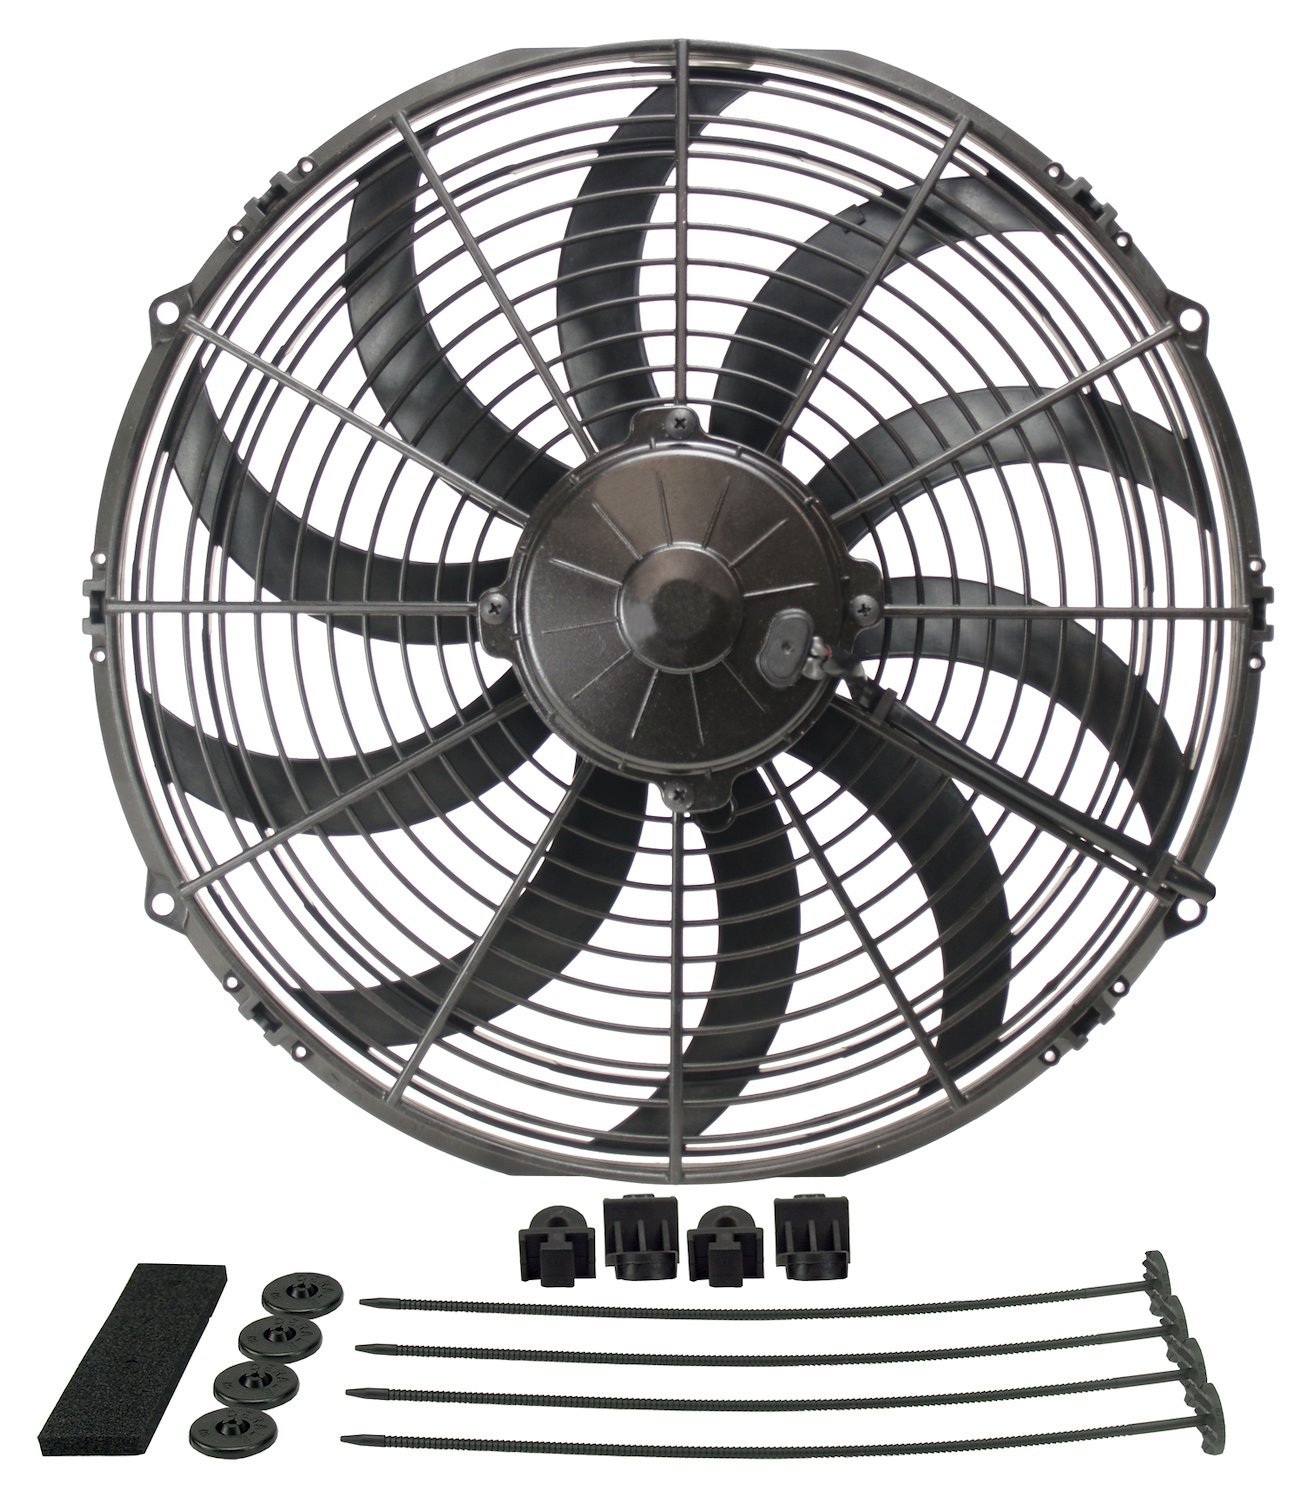 14" High-Output Extreme Ultra-Low Profile Waterproof/Dustproof Puller-Style Electric Fan 1864 CFM